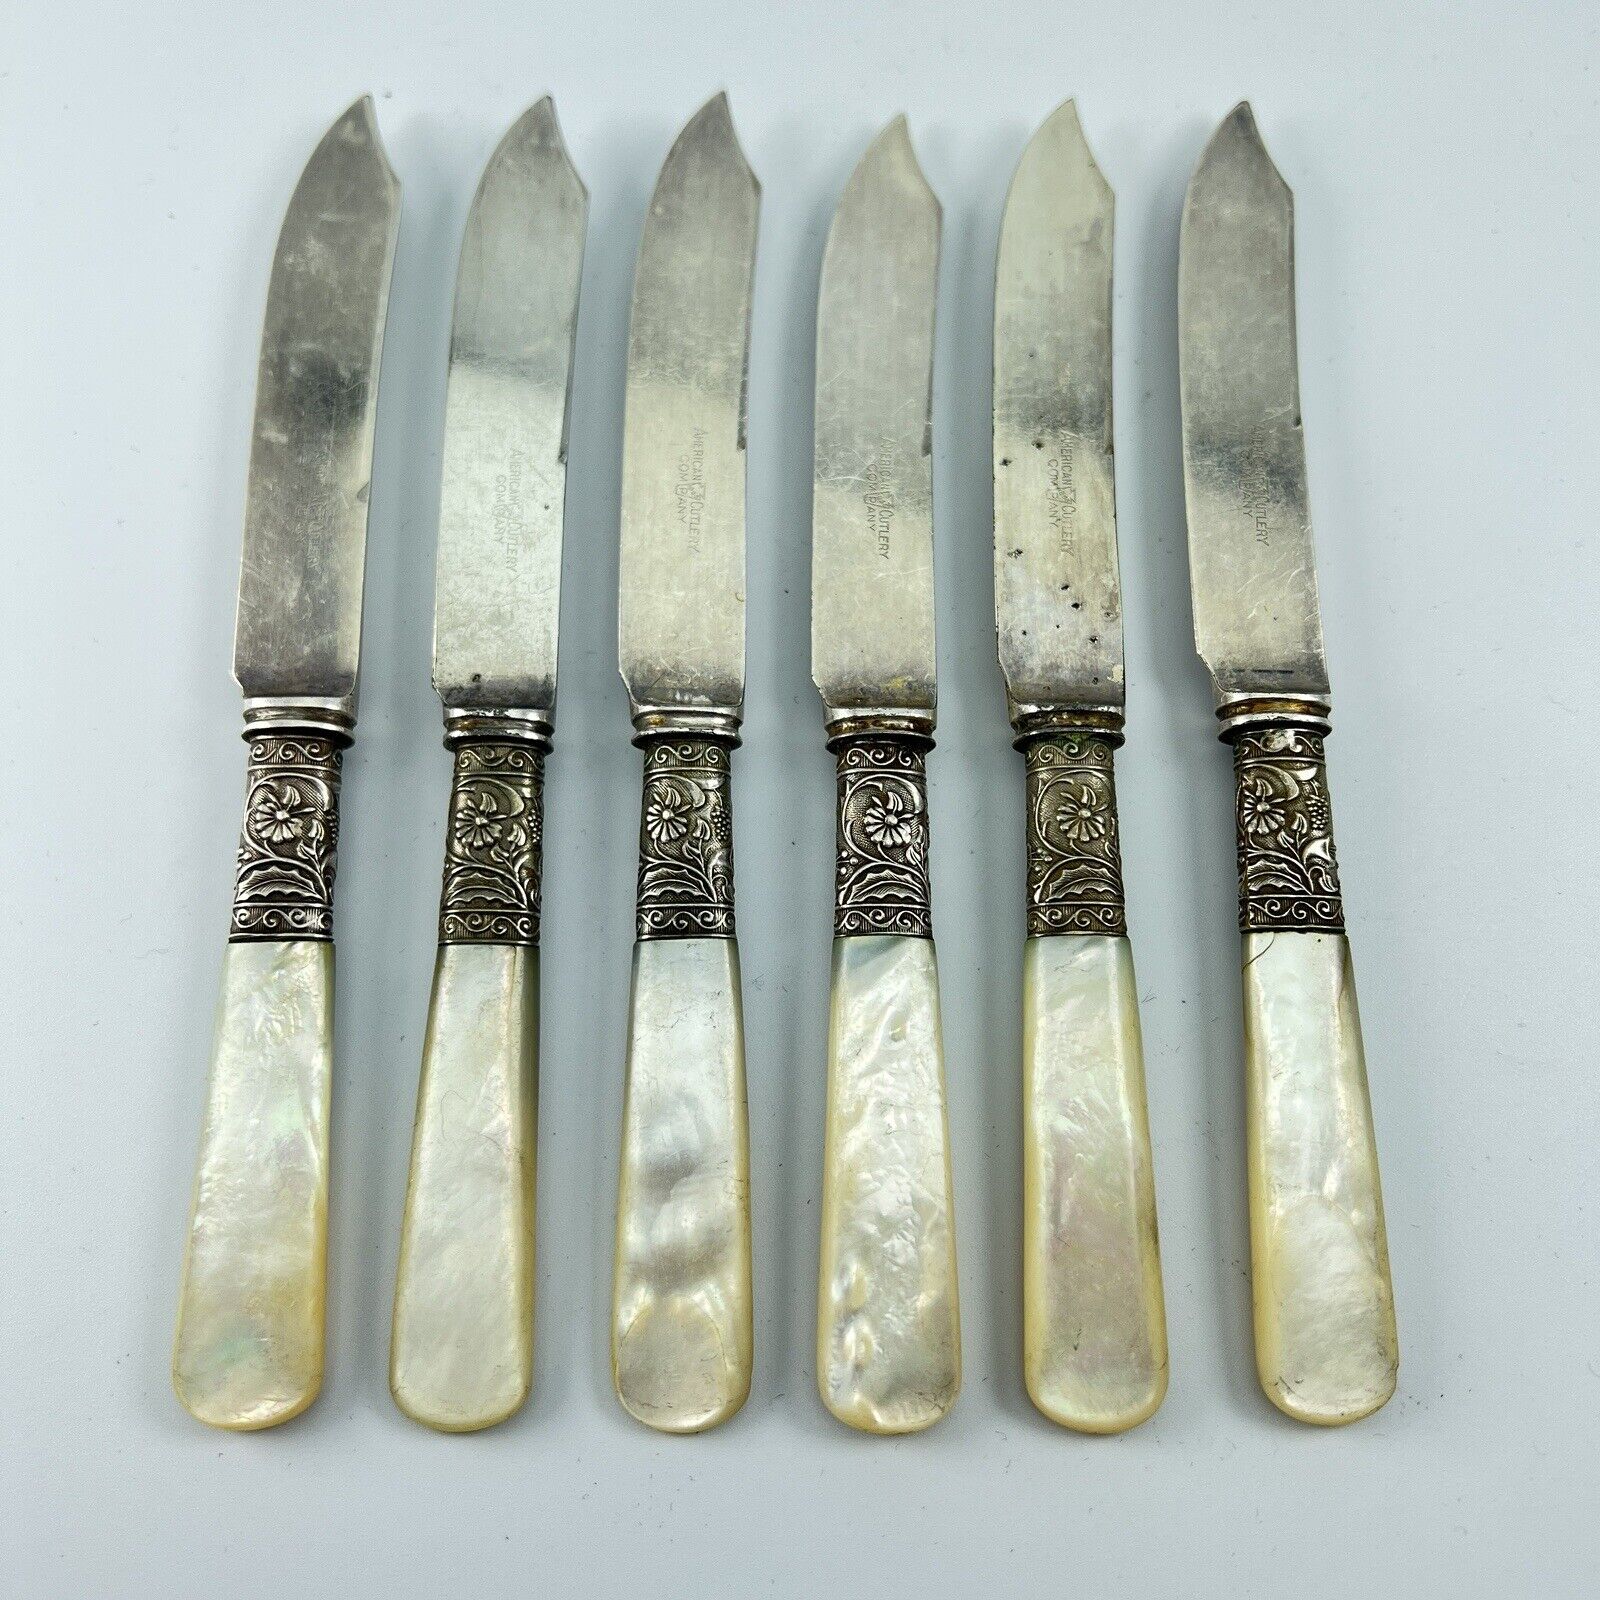  American Cutlery Fruit Knife Mother Of Pearl Handled Flatware 5 7/8 6Pc Set